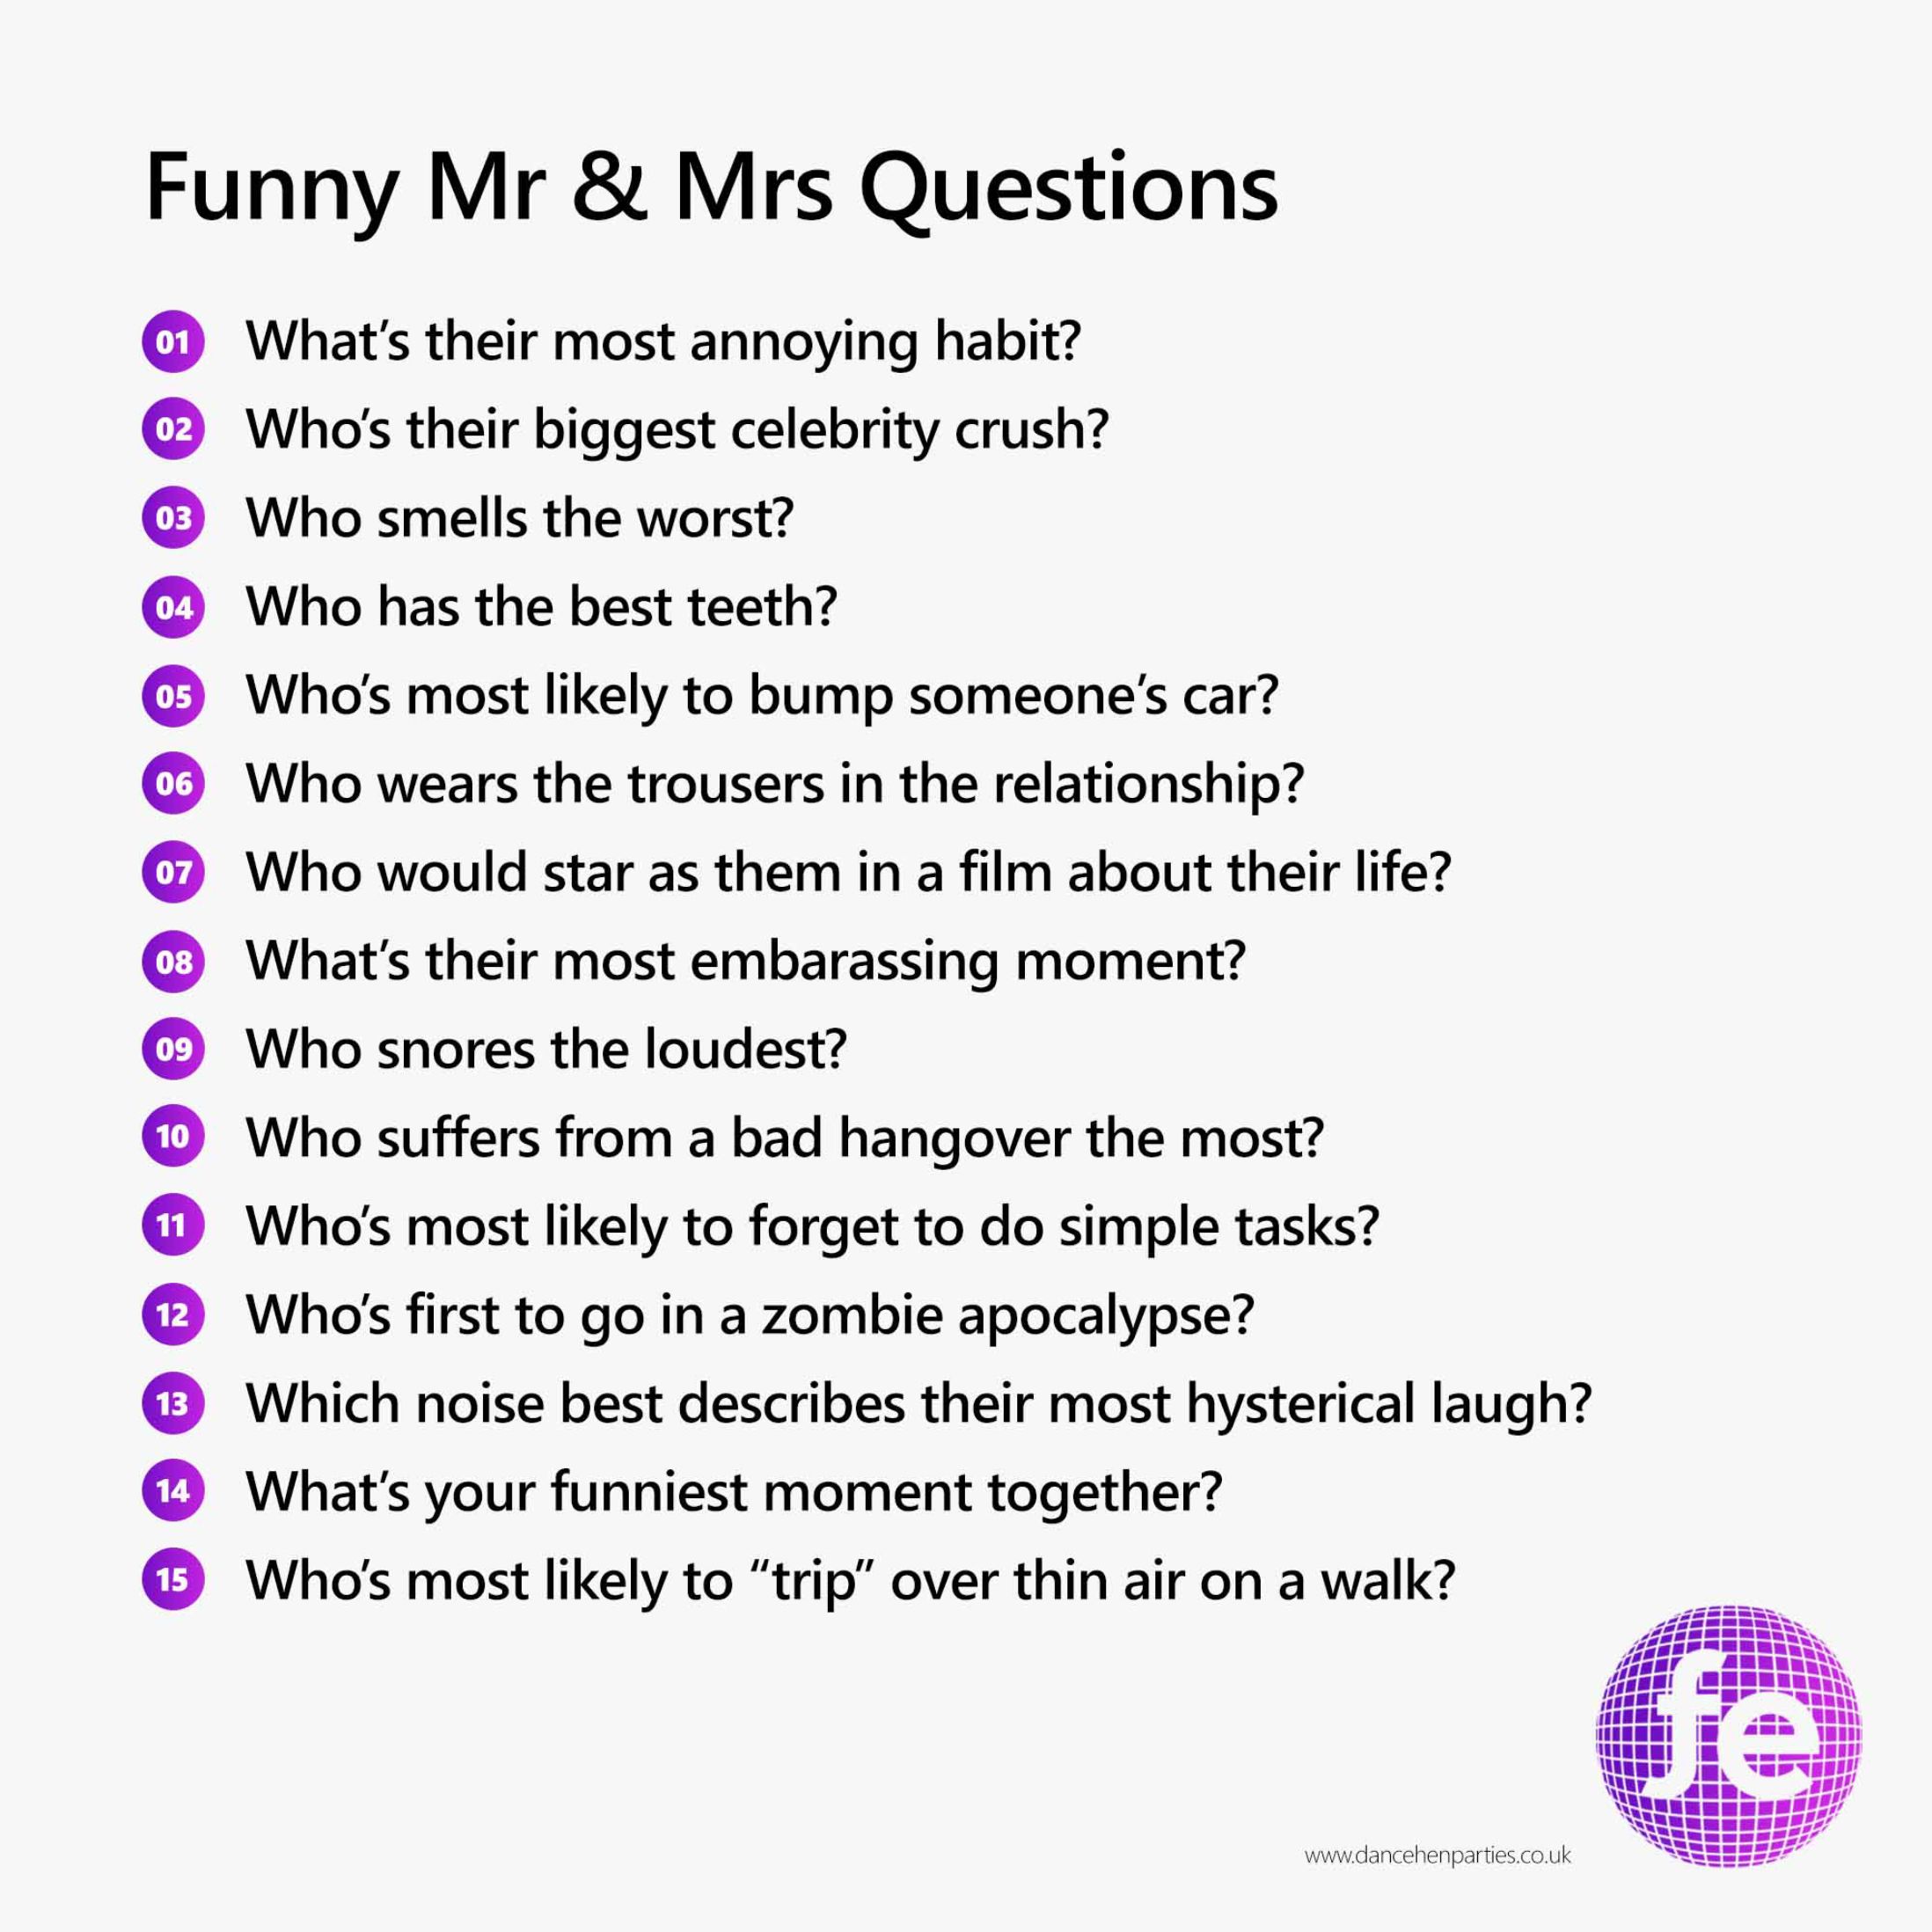 Mr & Mrs Questions - Funny Questions